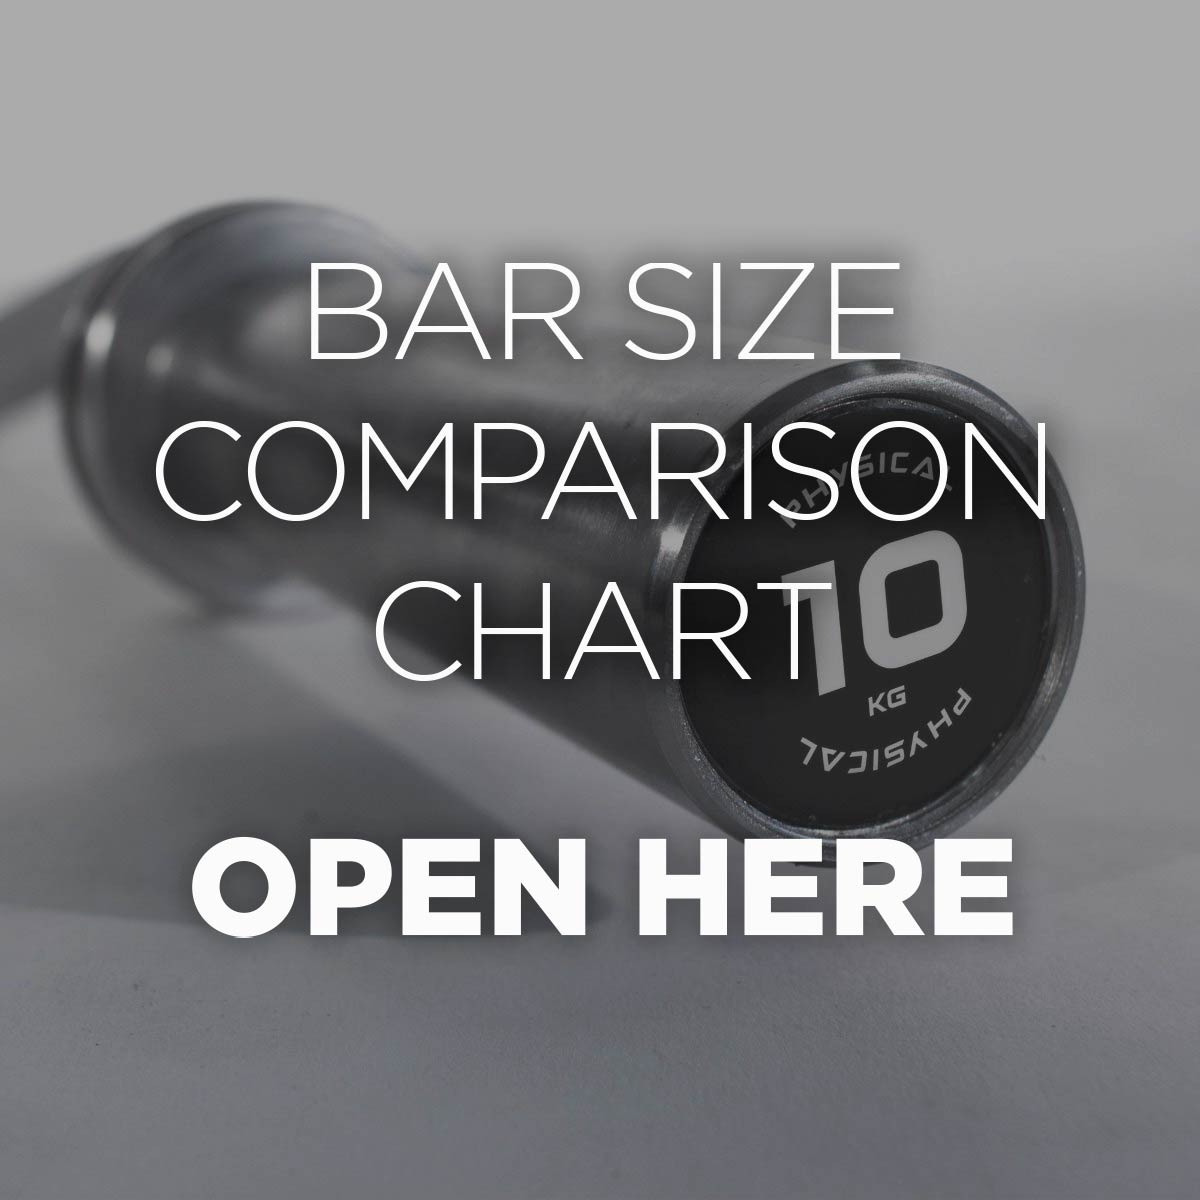 Olympic Bar Size Comparison Chart